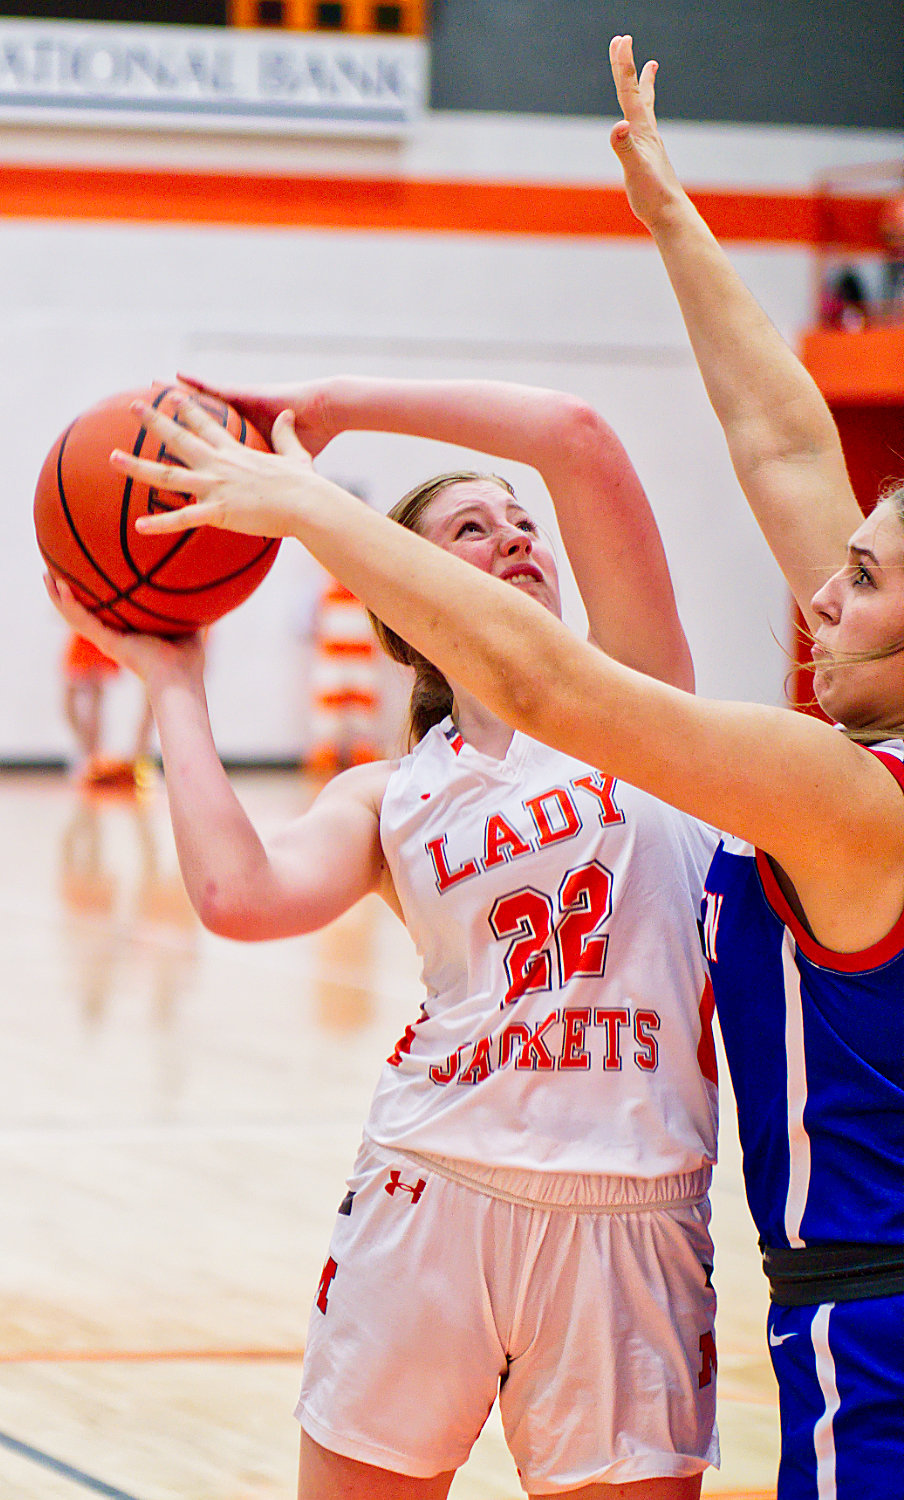 Macy Fischer puts up a shot closely contested by Annabelle Popek. [see more shots, buy basketball photos]